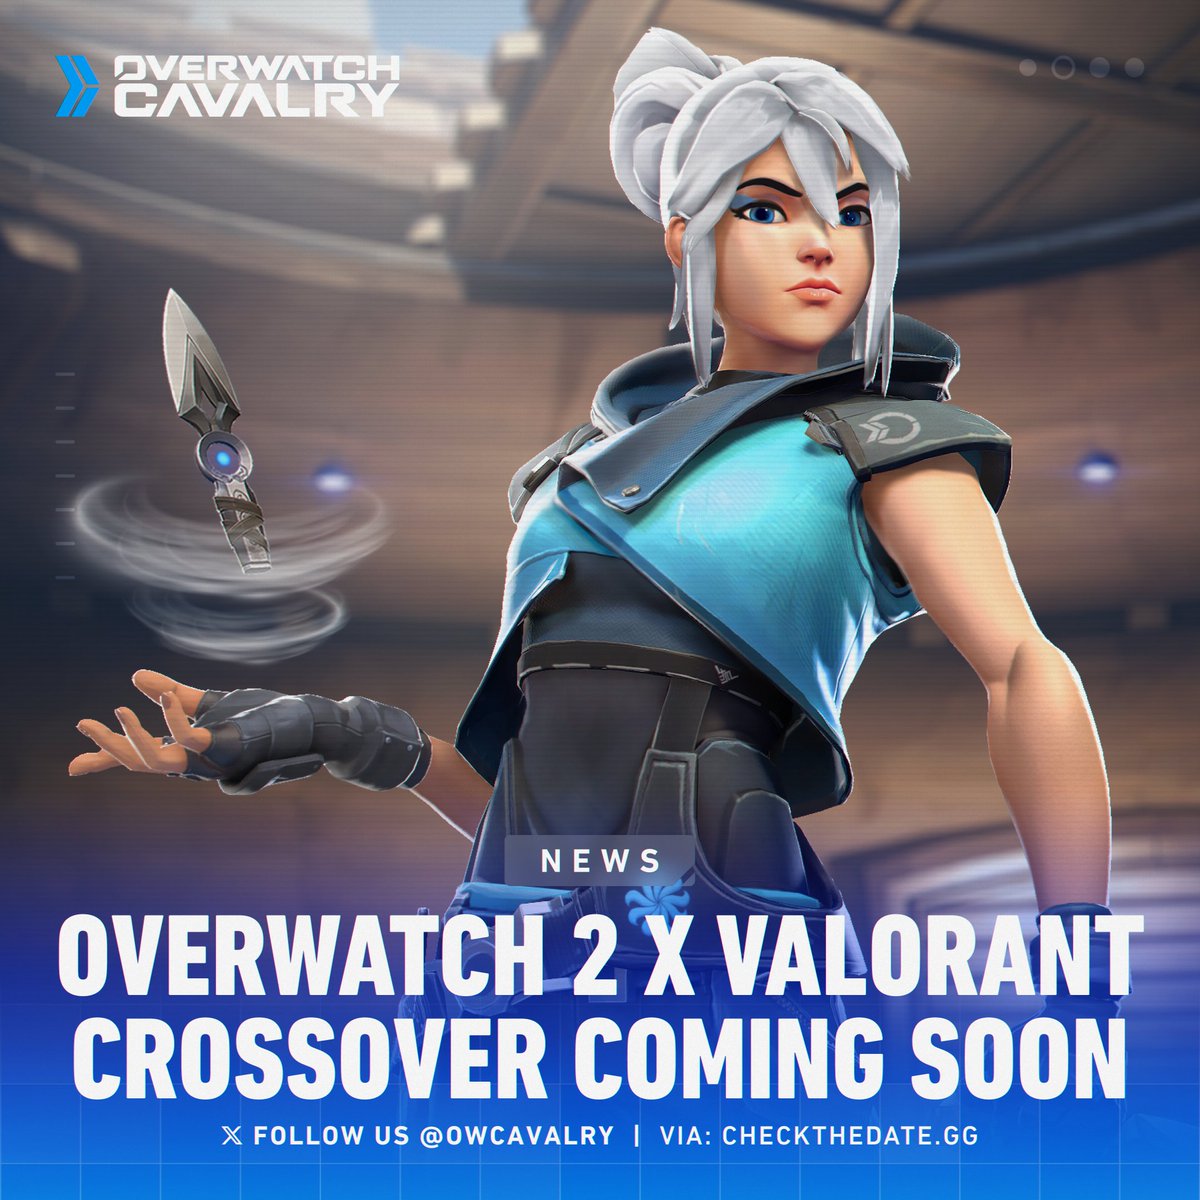 Introducing: Overwatch 2 x VALORANT 🔻 Featuring 5 new legendary skins including Jett Kiriko, a limited-time 'Spike Rush' gamemode, and cosmetics across both games. 📌 Defy the limits on April 31st!